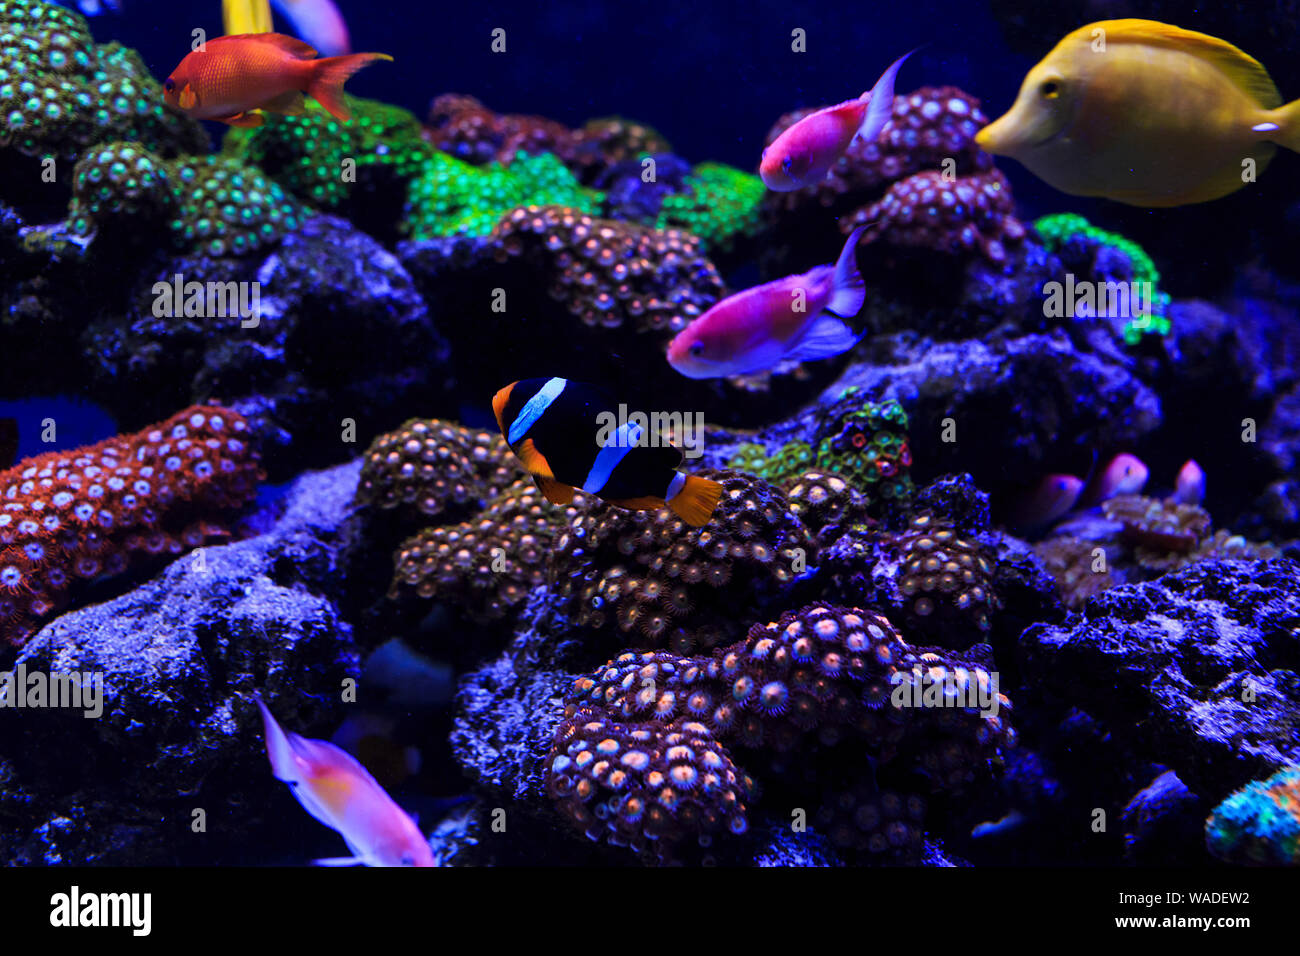 Beautiful Group Of Sea Fishes Captured On Camera Under The Water Under Dark Blue Natural Backdrop Of The Ocean Or Aquarium Underwater Colorful Fishes Stock Photo Alamy